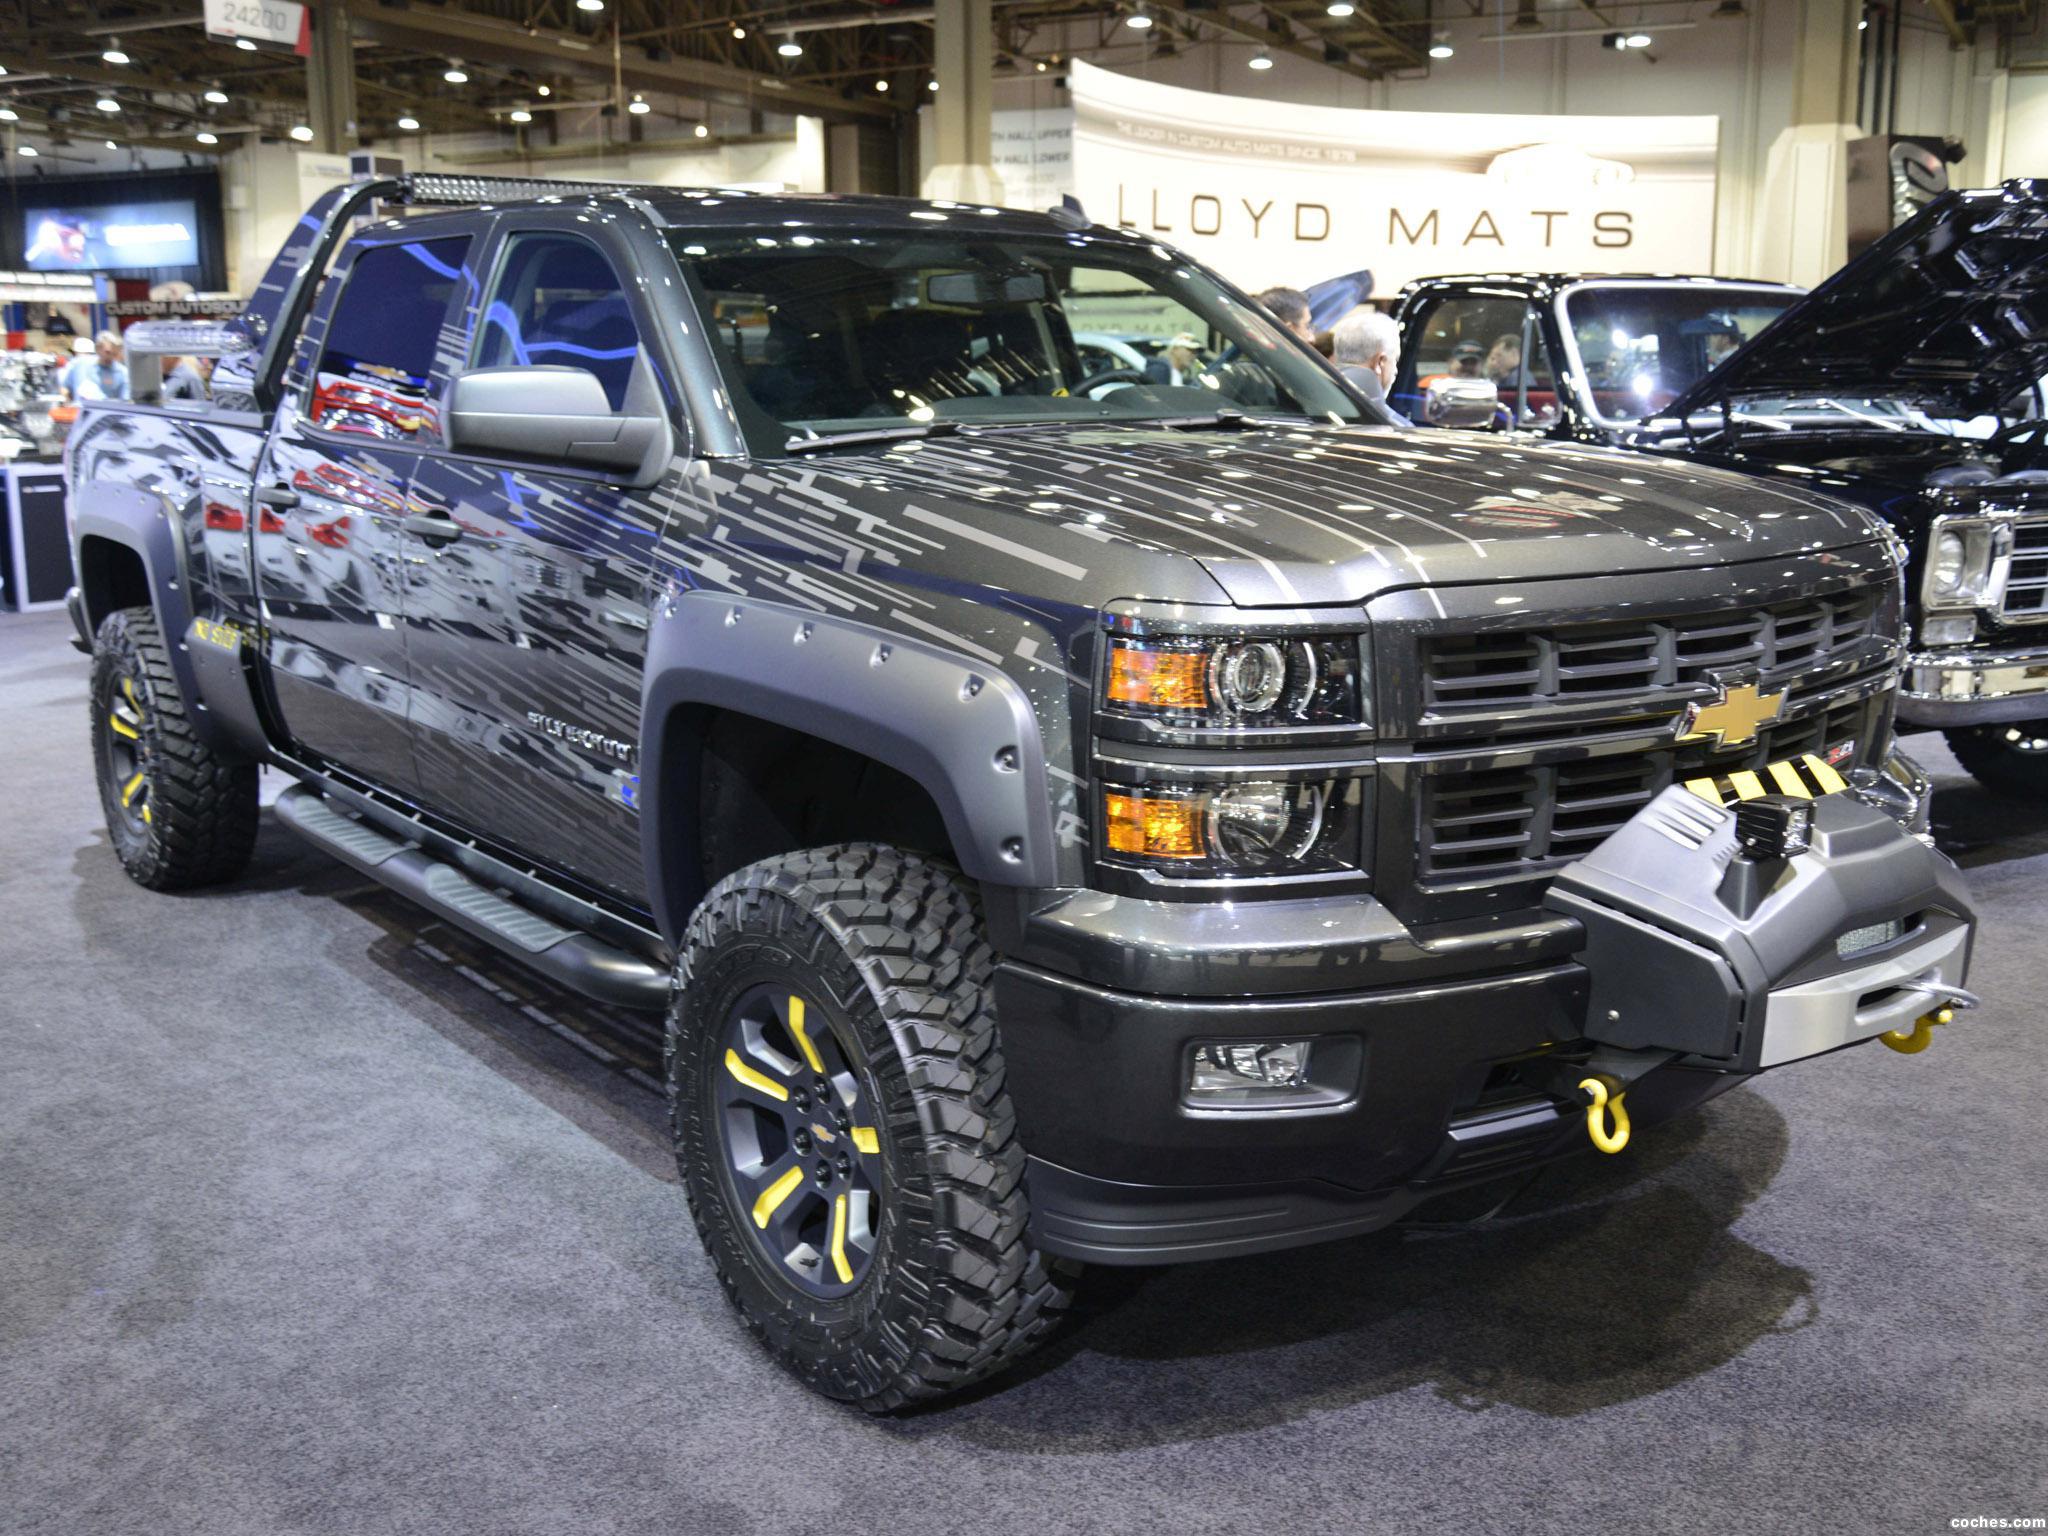 Silverado Black Ops | 2019-2020 New Car Release and Reviews